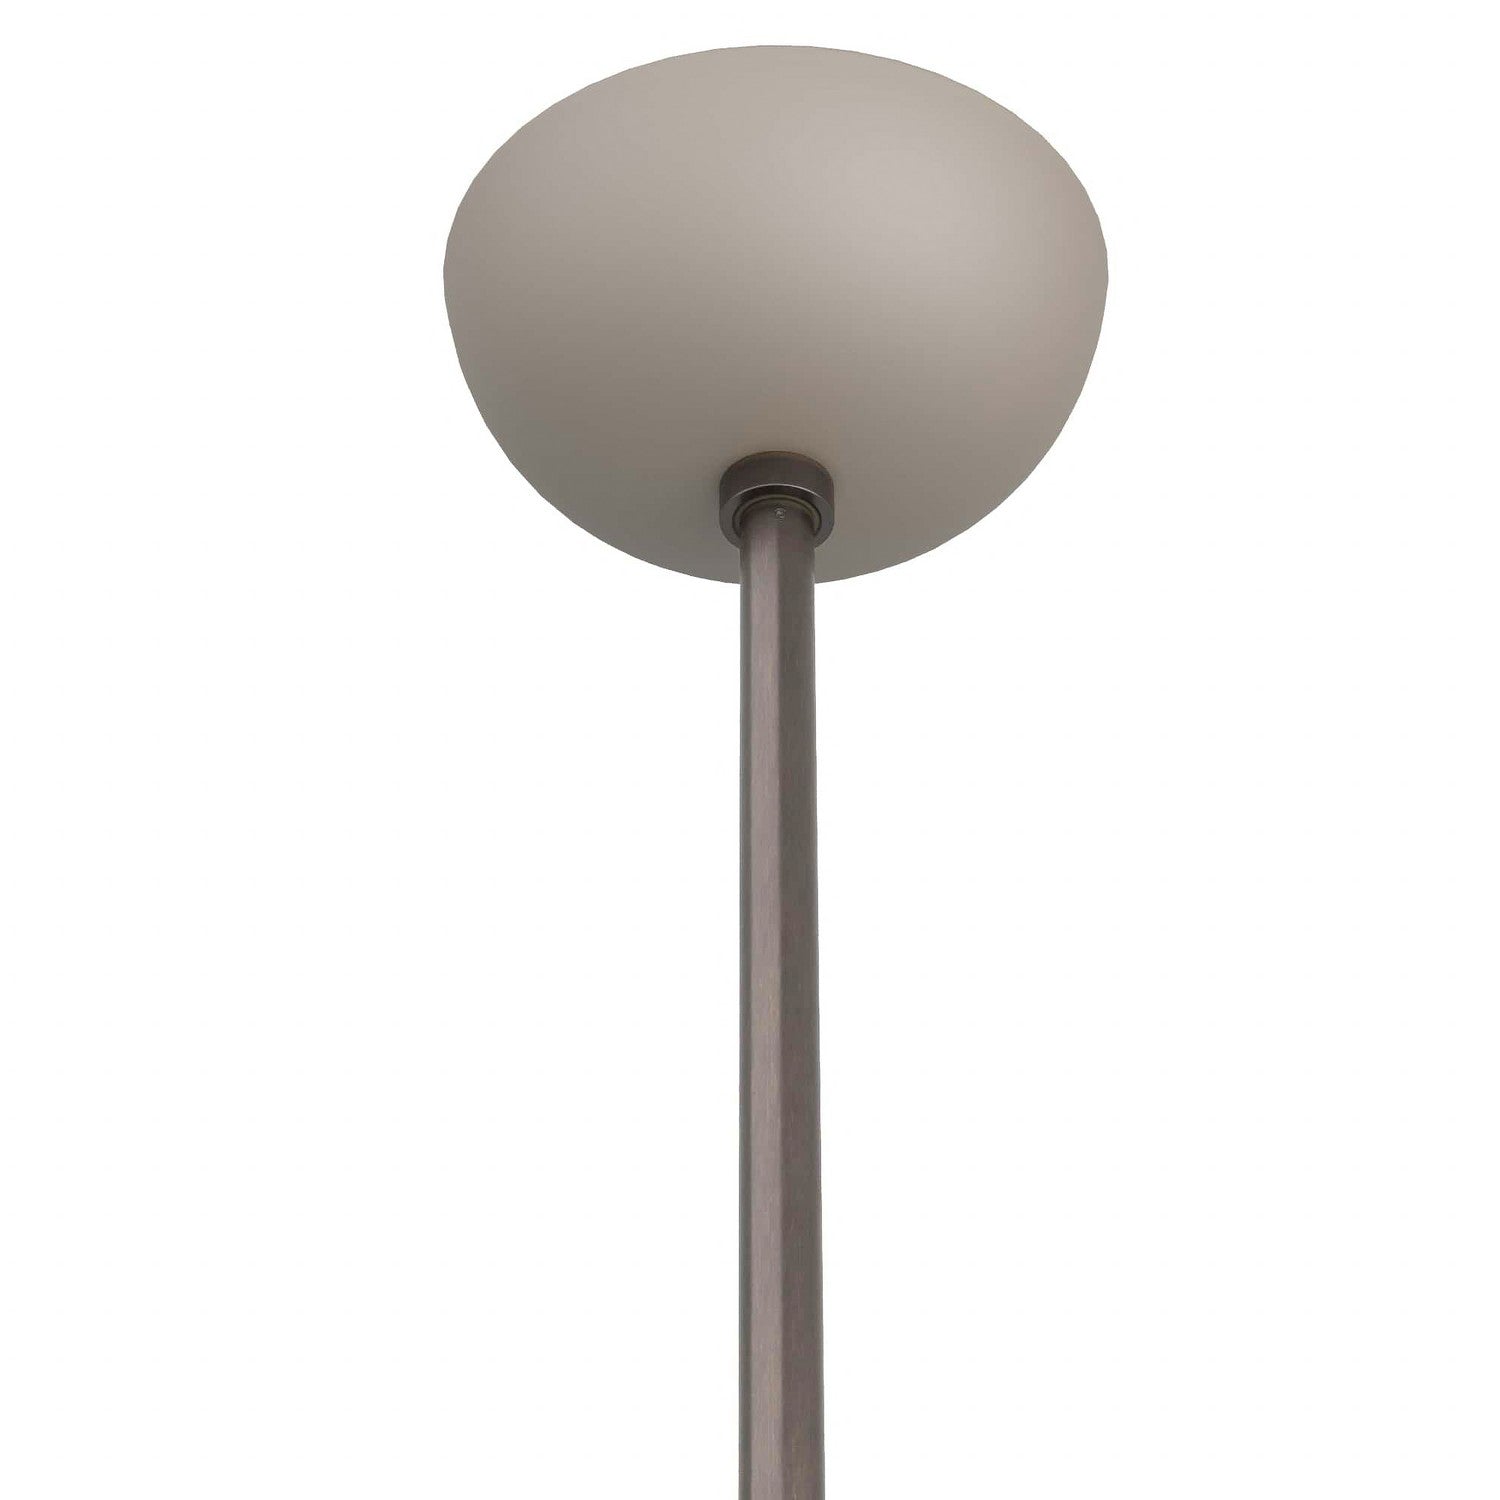 One Light Flush Mount from the Wade collection in Taupe finish